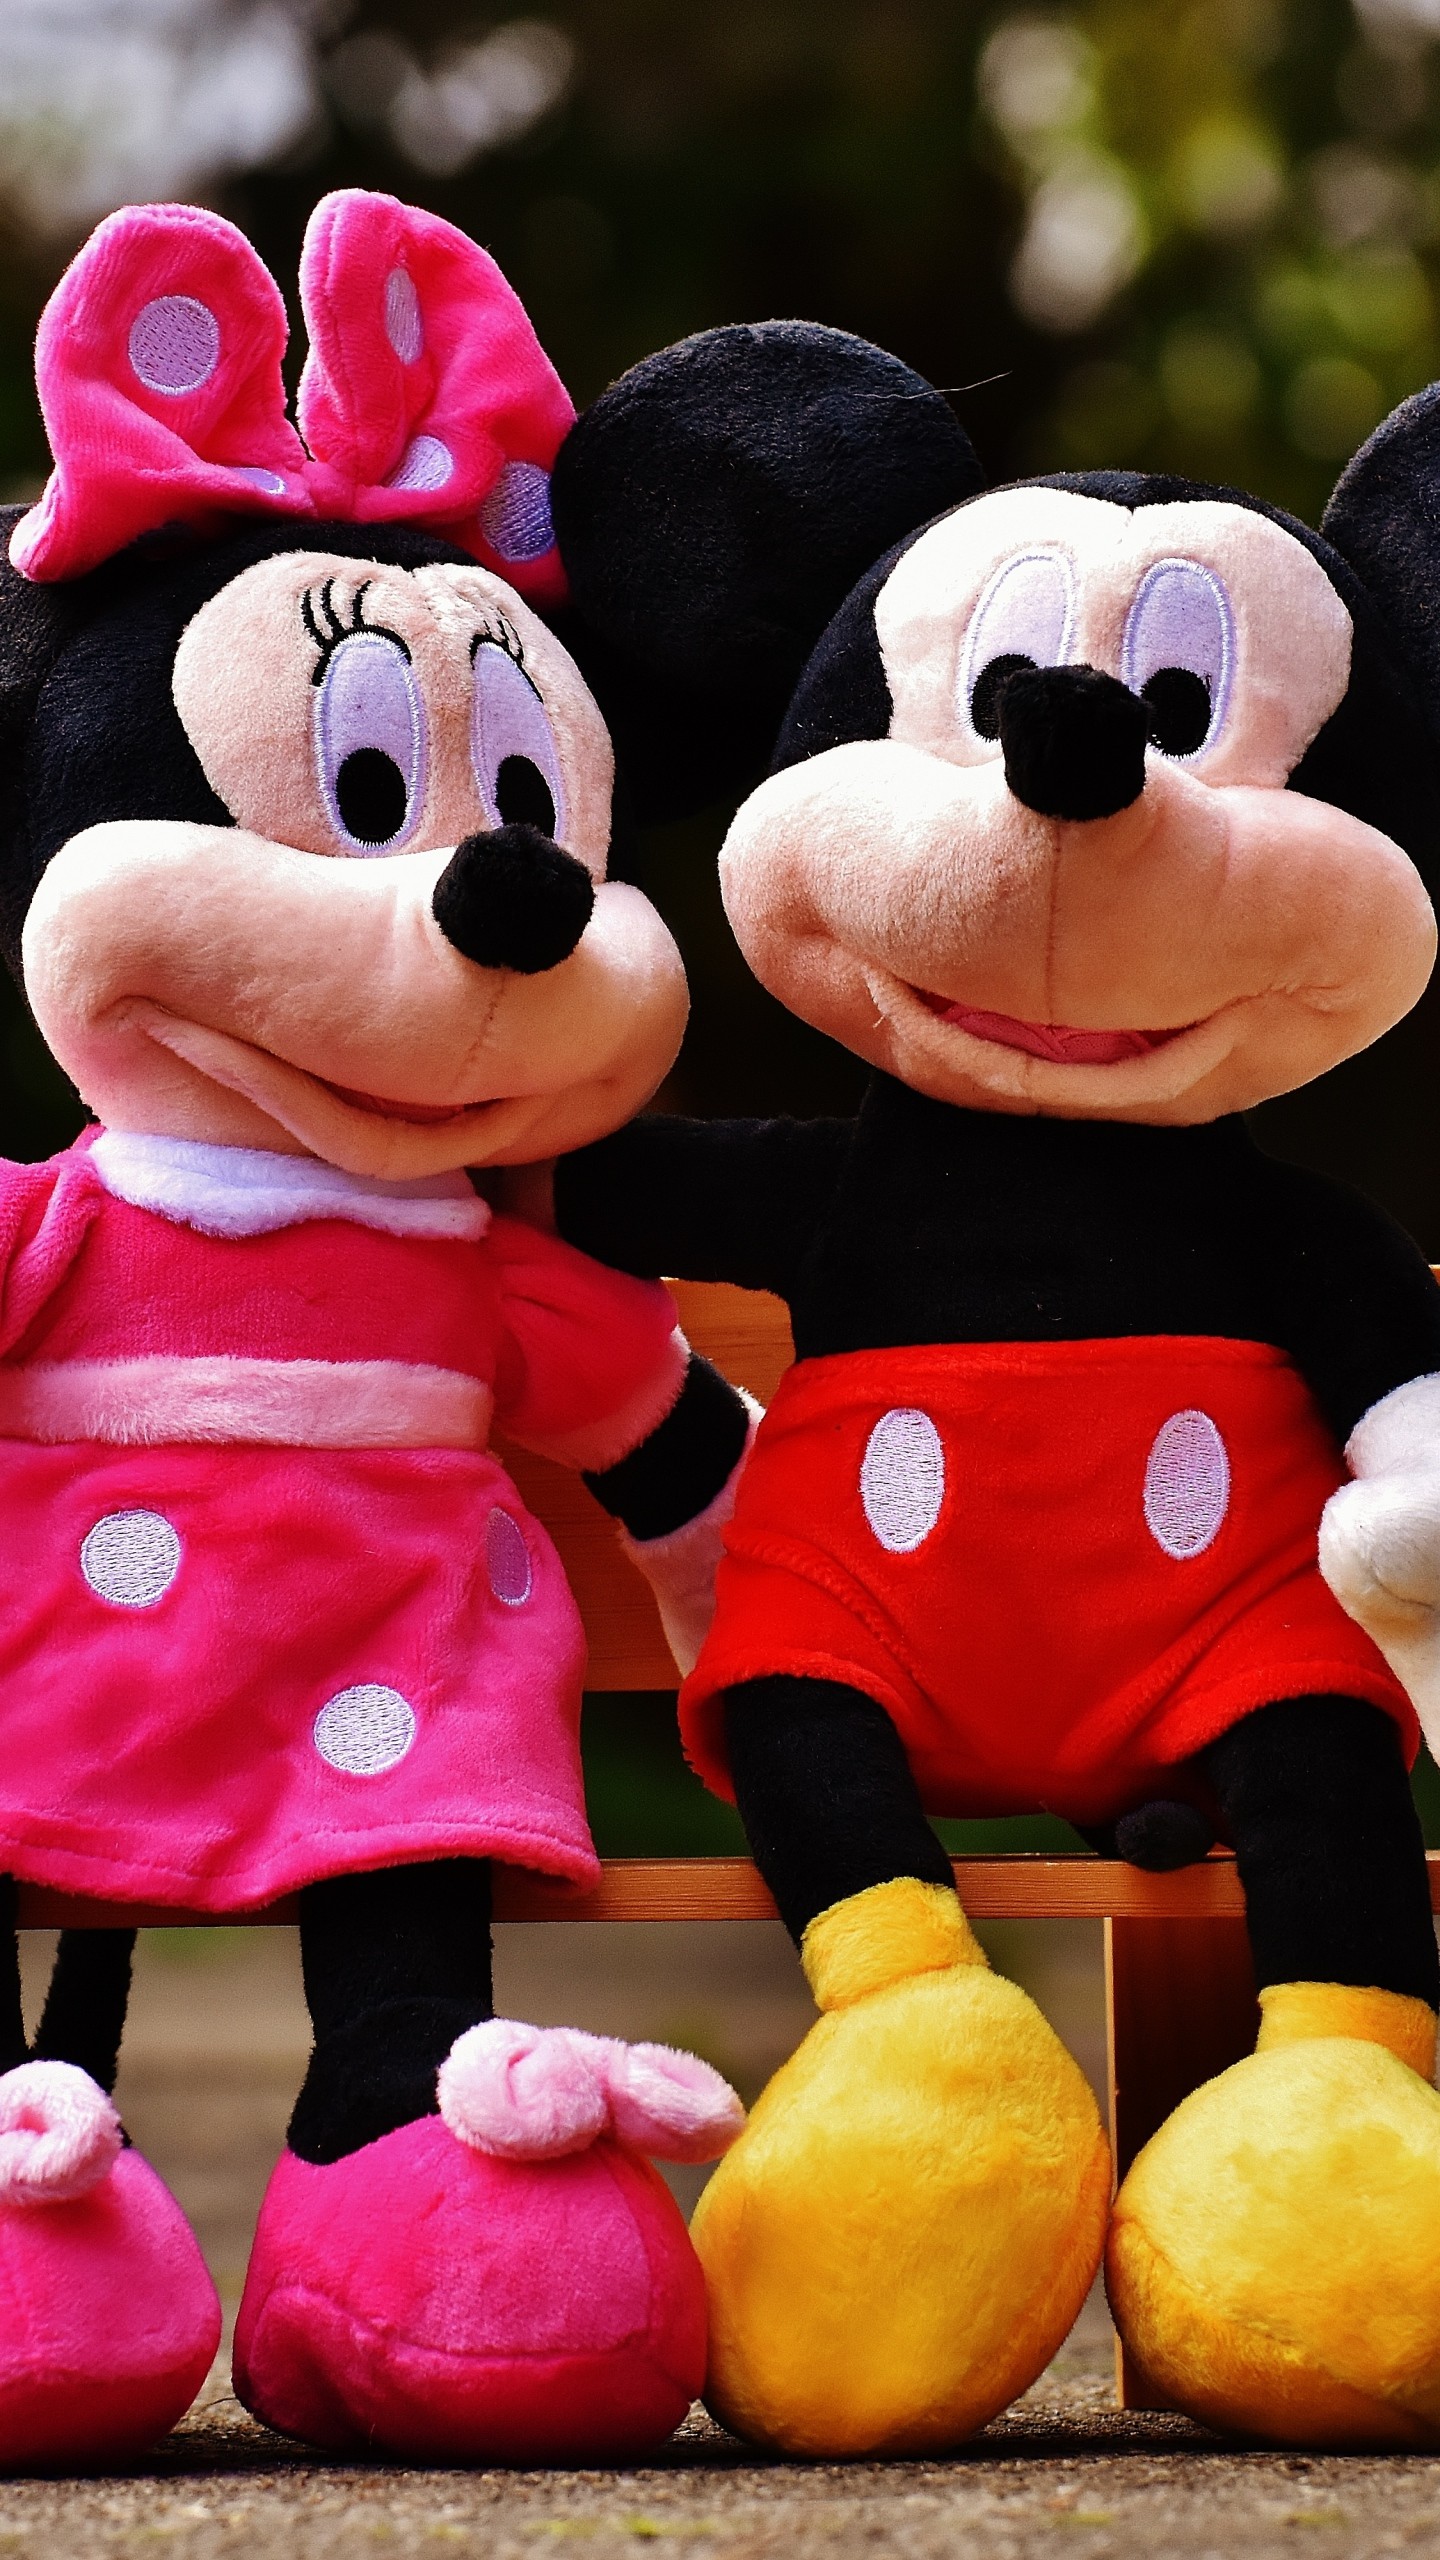 minnie mouse wallpaper for android,stuffed toy,plush,toy,pink,textile